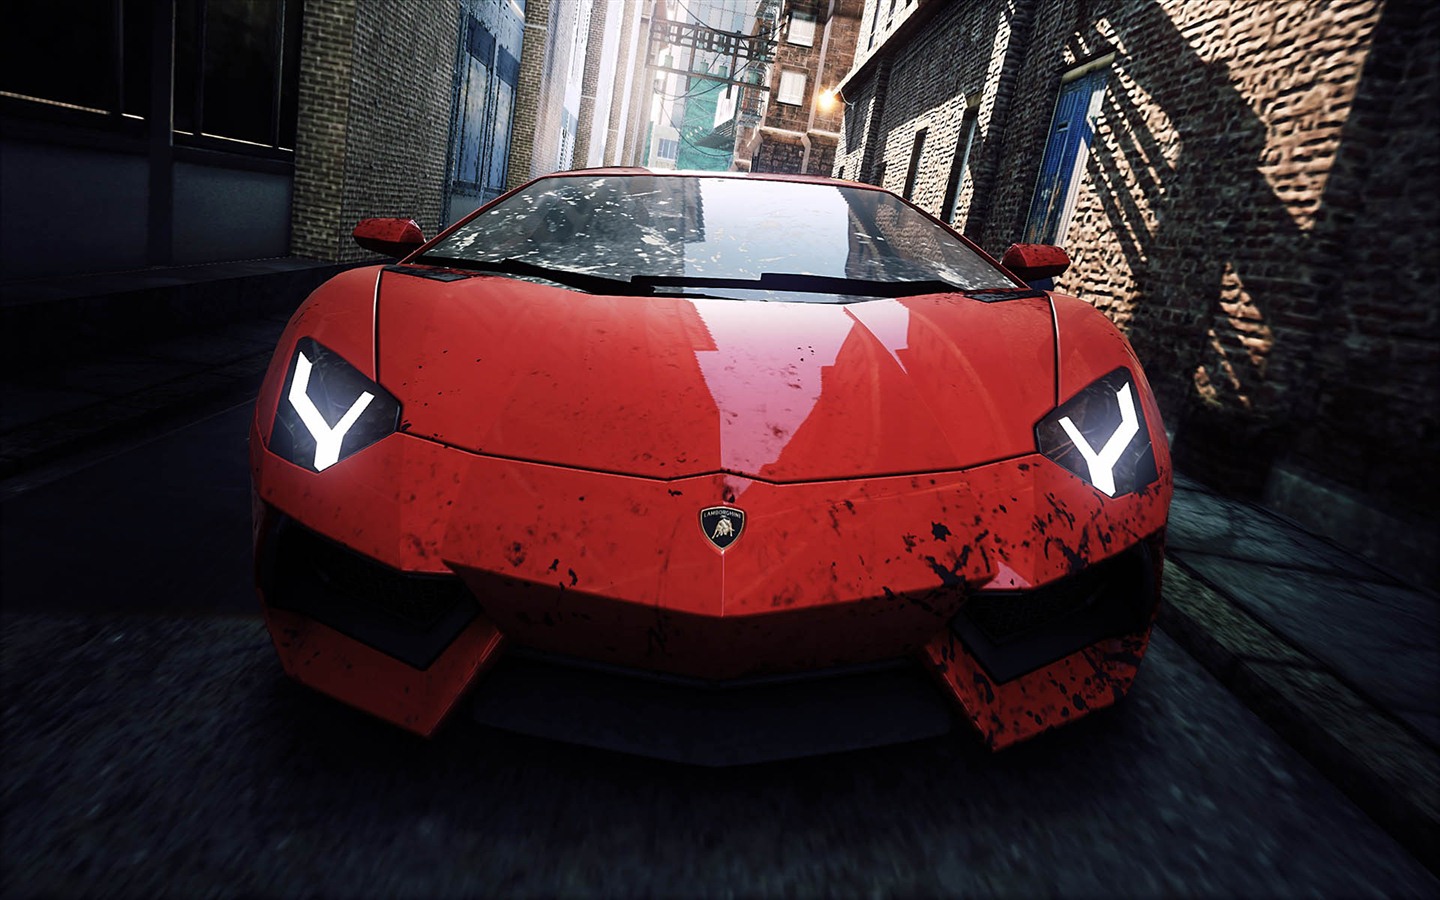 Need for Speed: Most Wanted 极品飞车17：最高通缉 高清壁纸10 - 1440x900